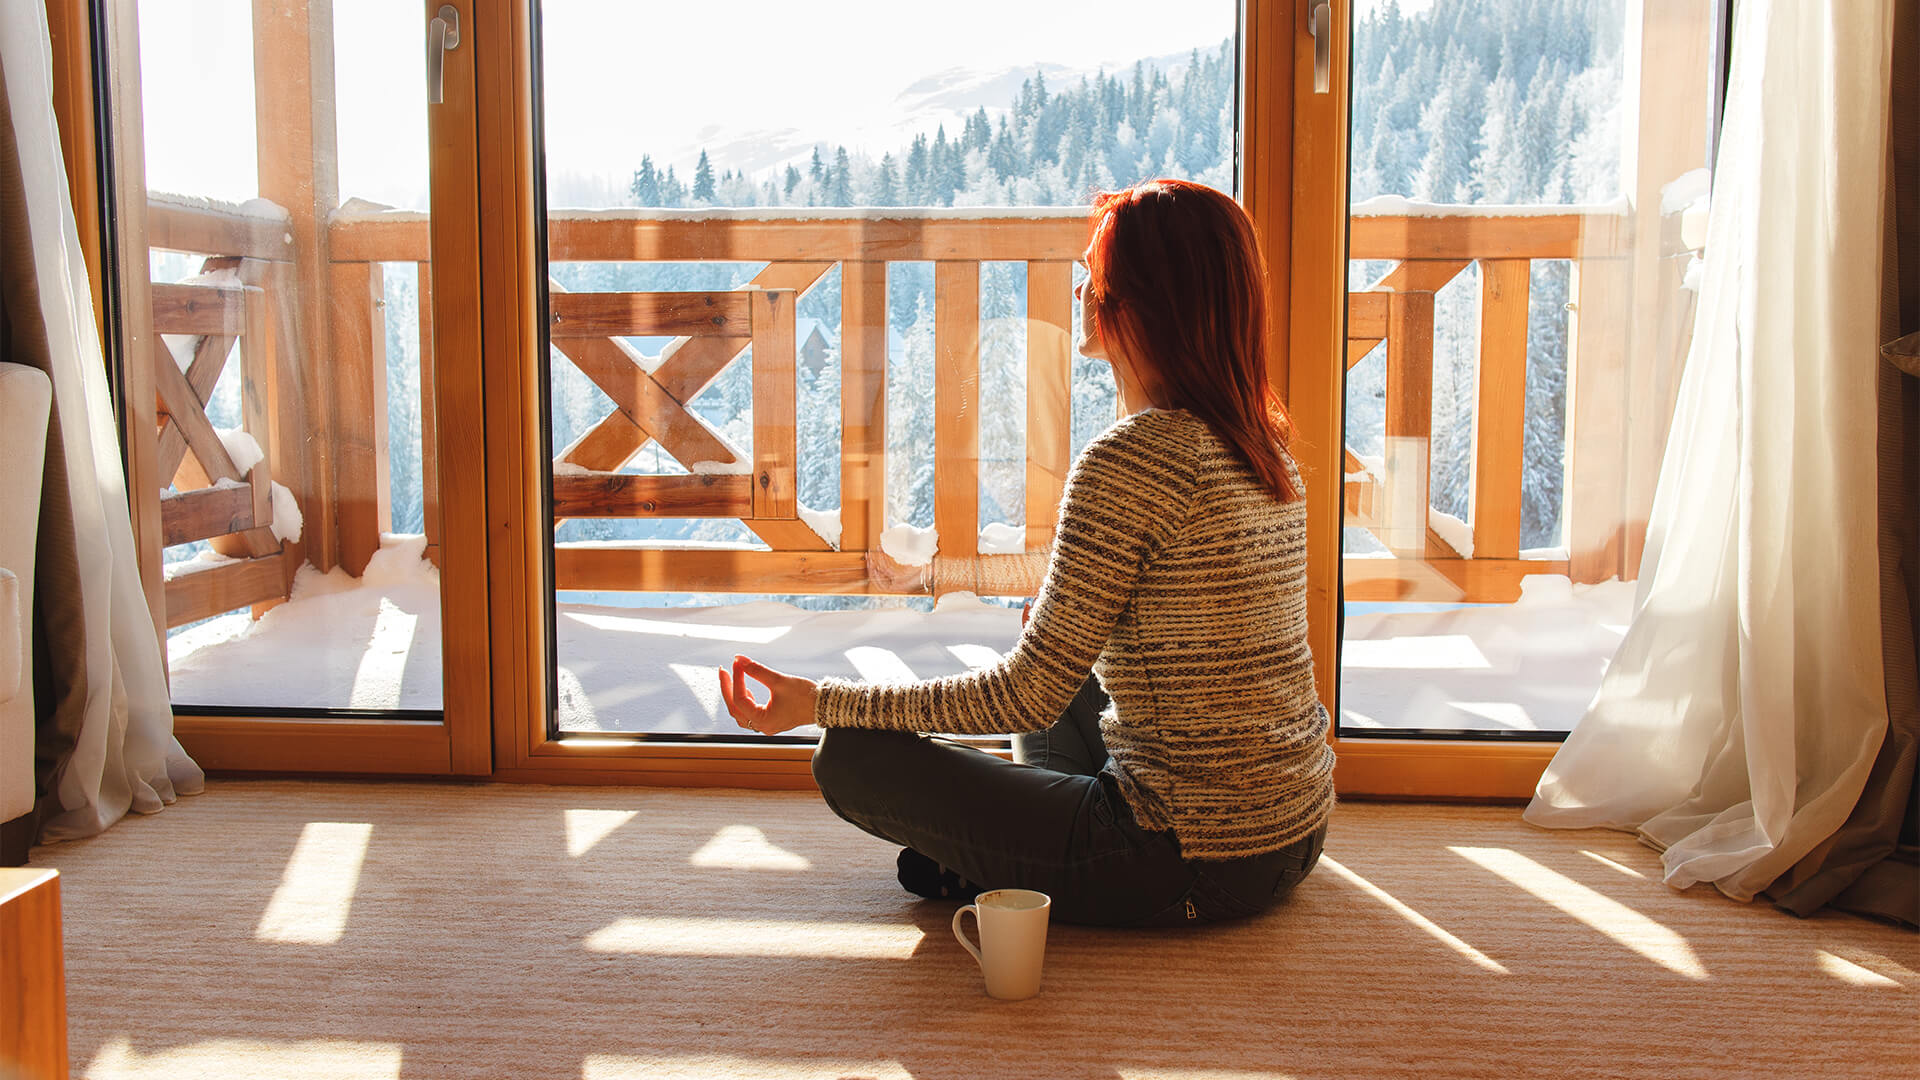 3 Proven Ways to Boost Your Mood and Well-Being During the Winter Blues